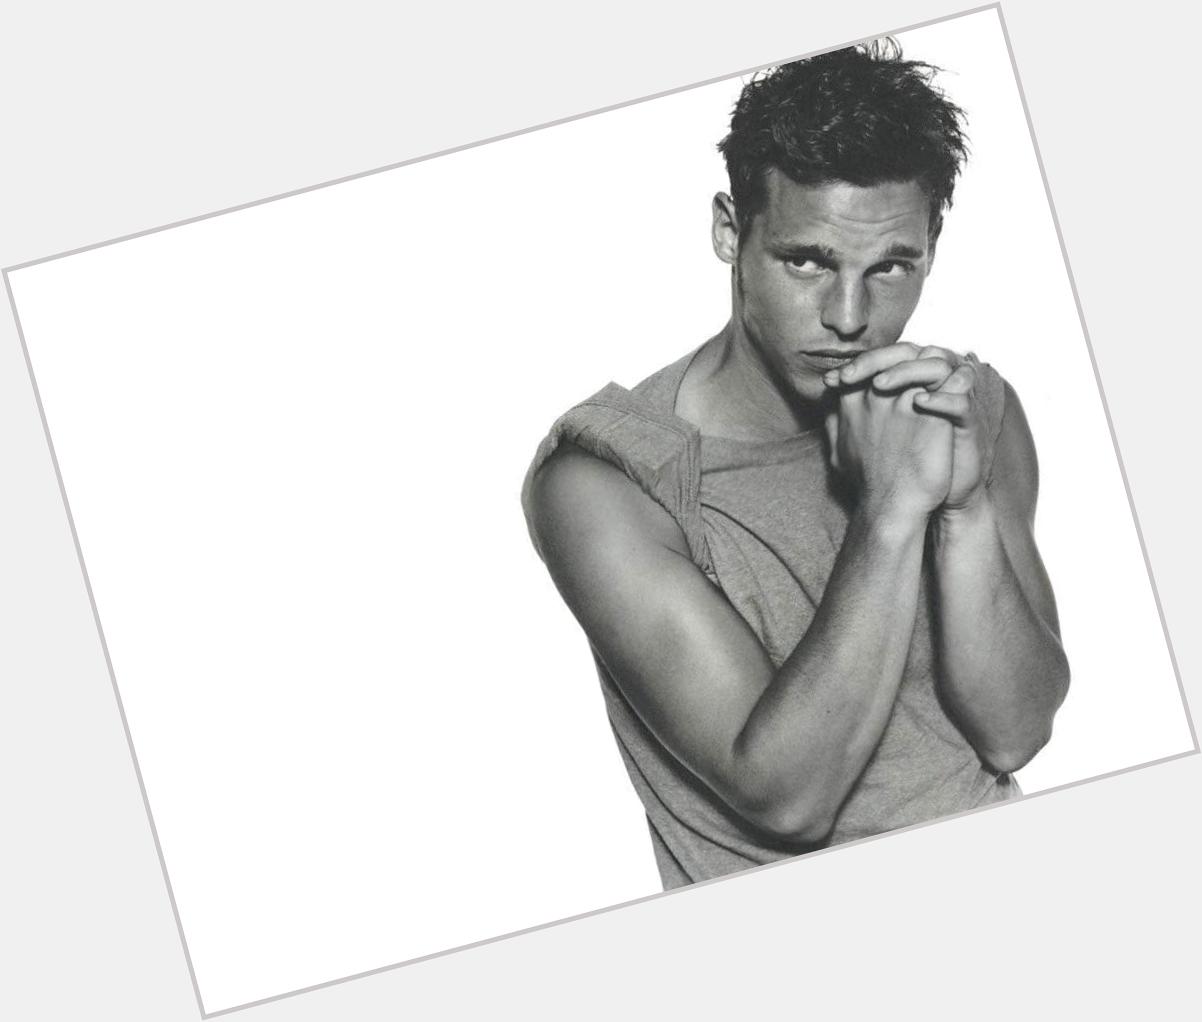  happy birthday to the one&only justin chambers! Ilysm thanks for playing one of my fav characters 